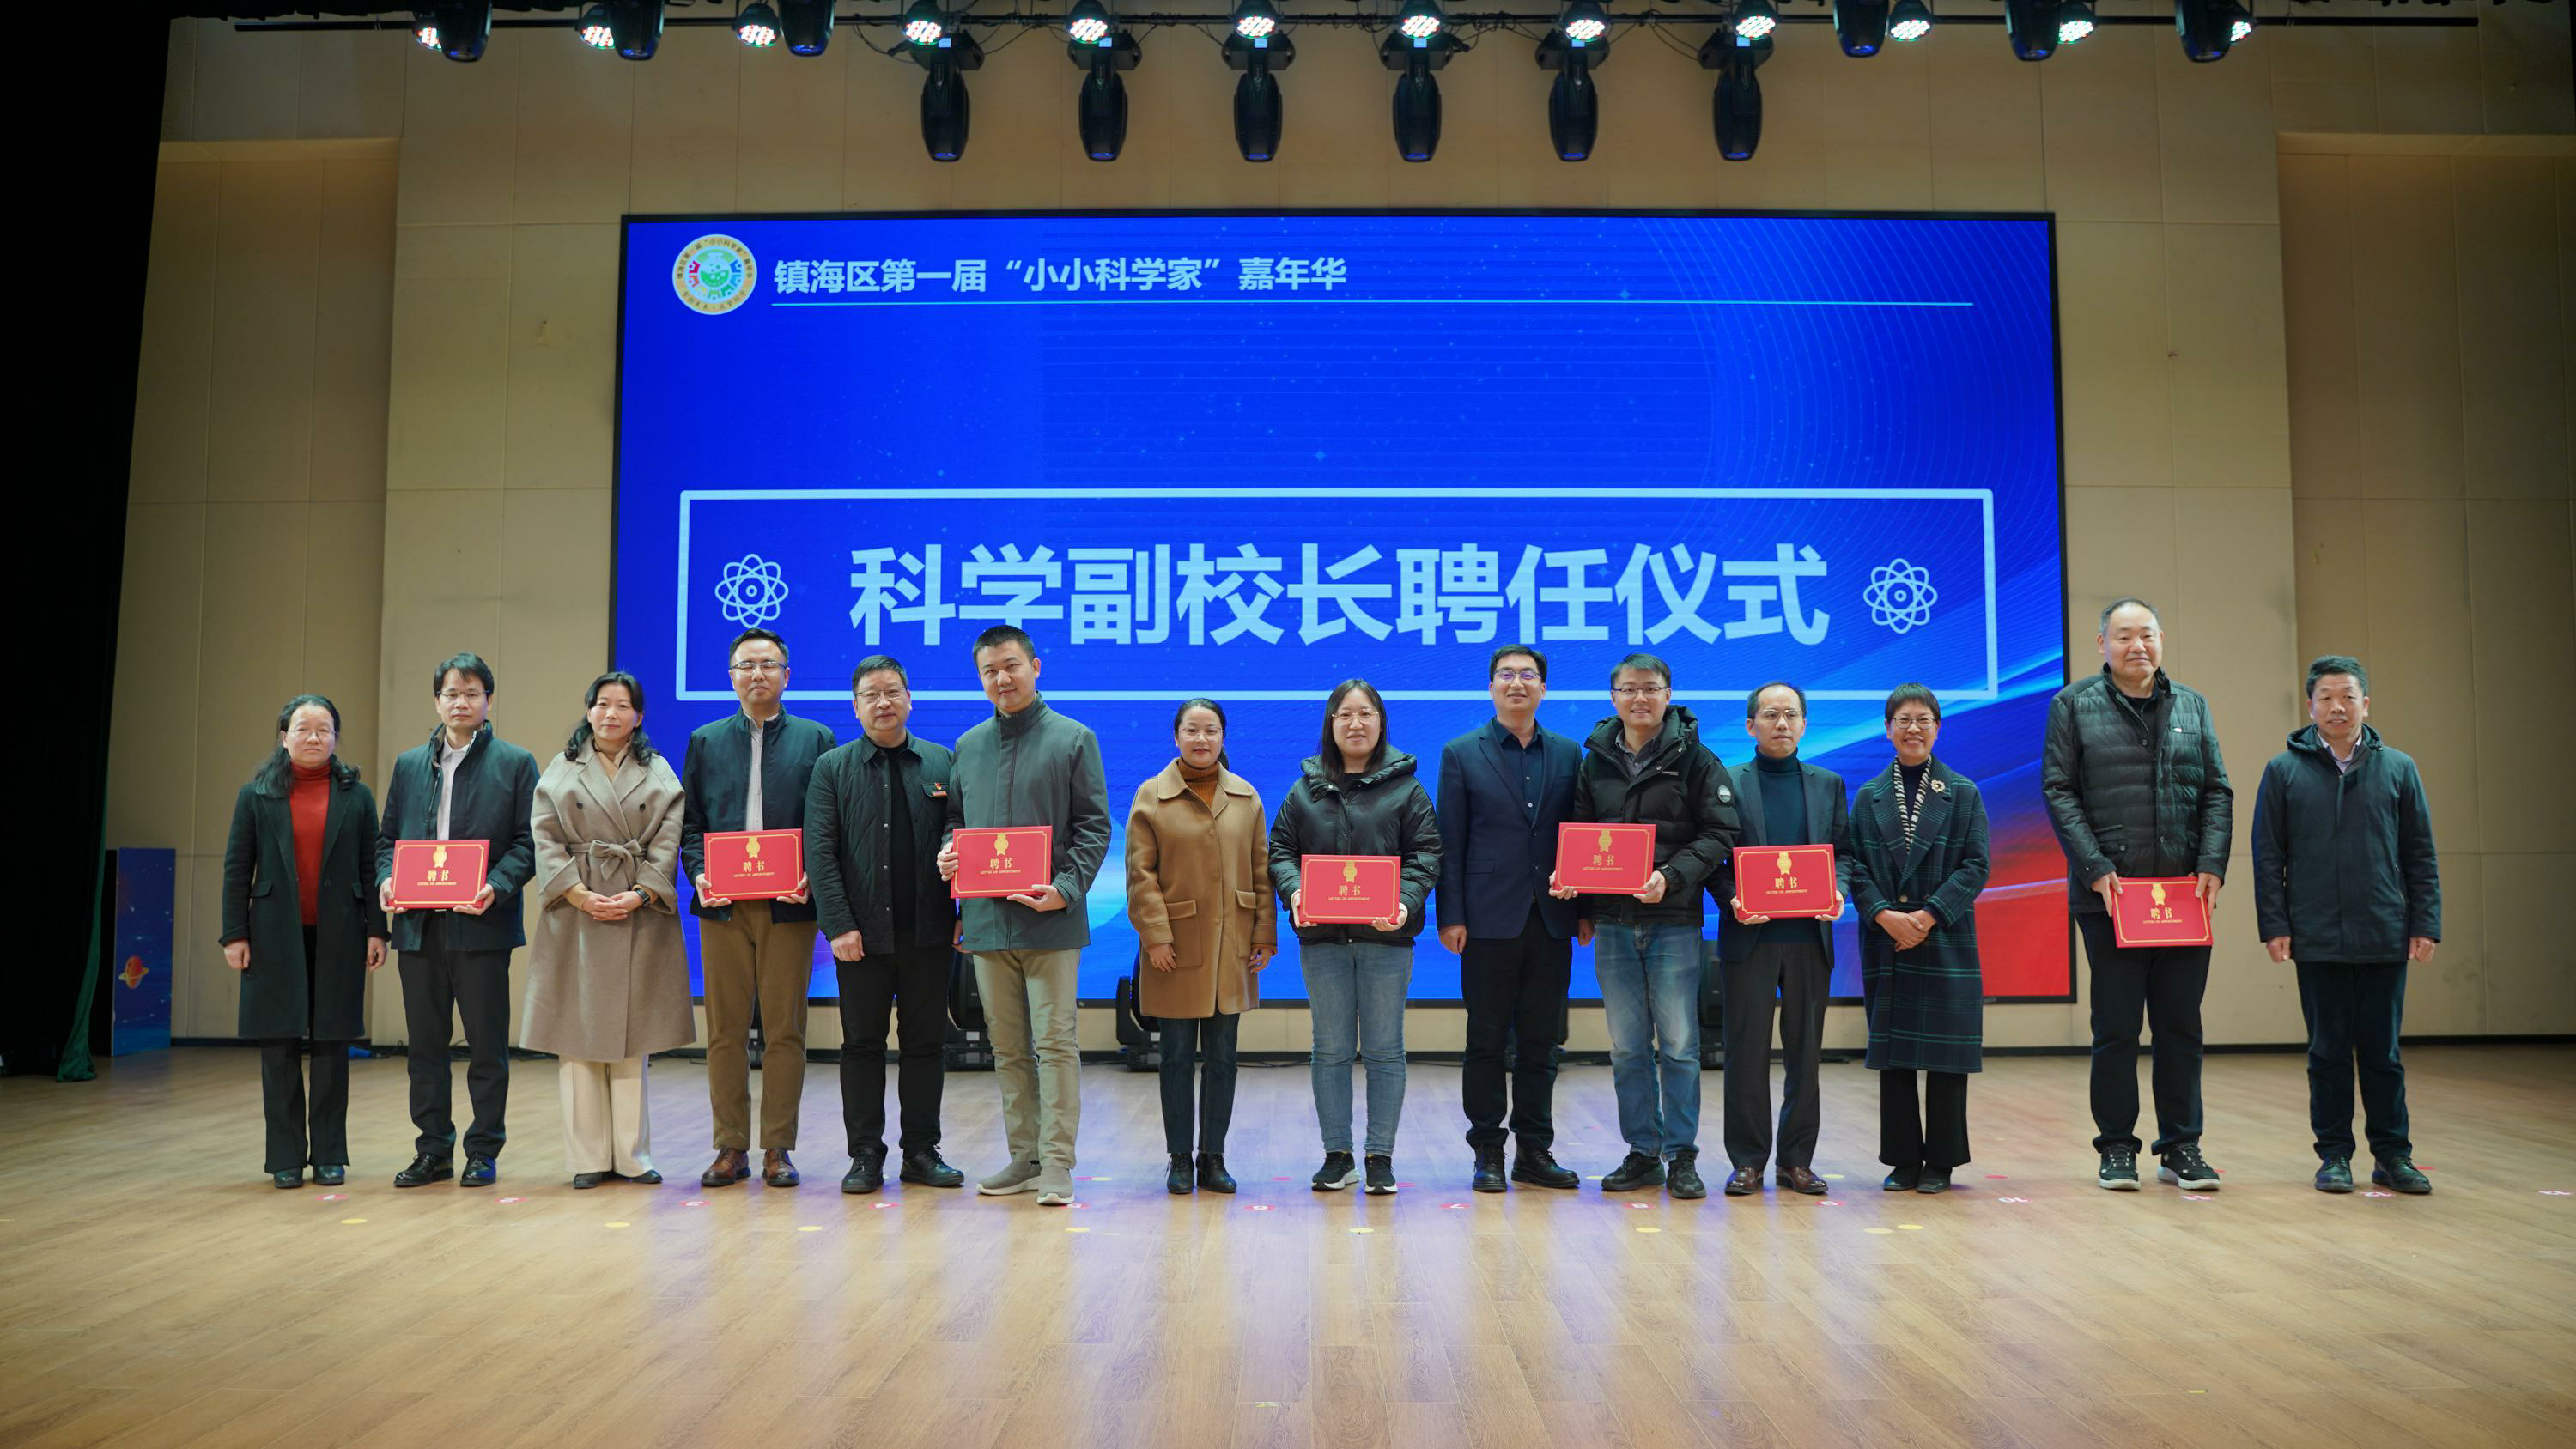 Zhejiang will organize thousands of scientists as vice presidents of primary and secondary schools, and two academicians are hired